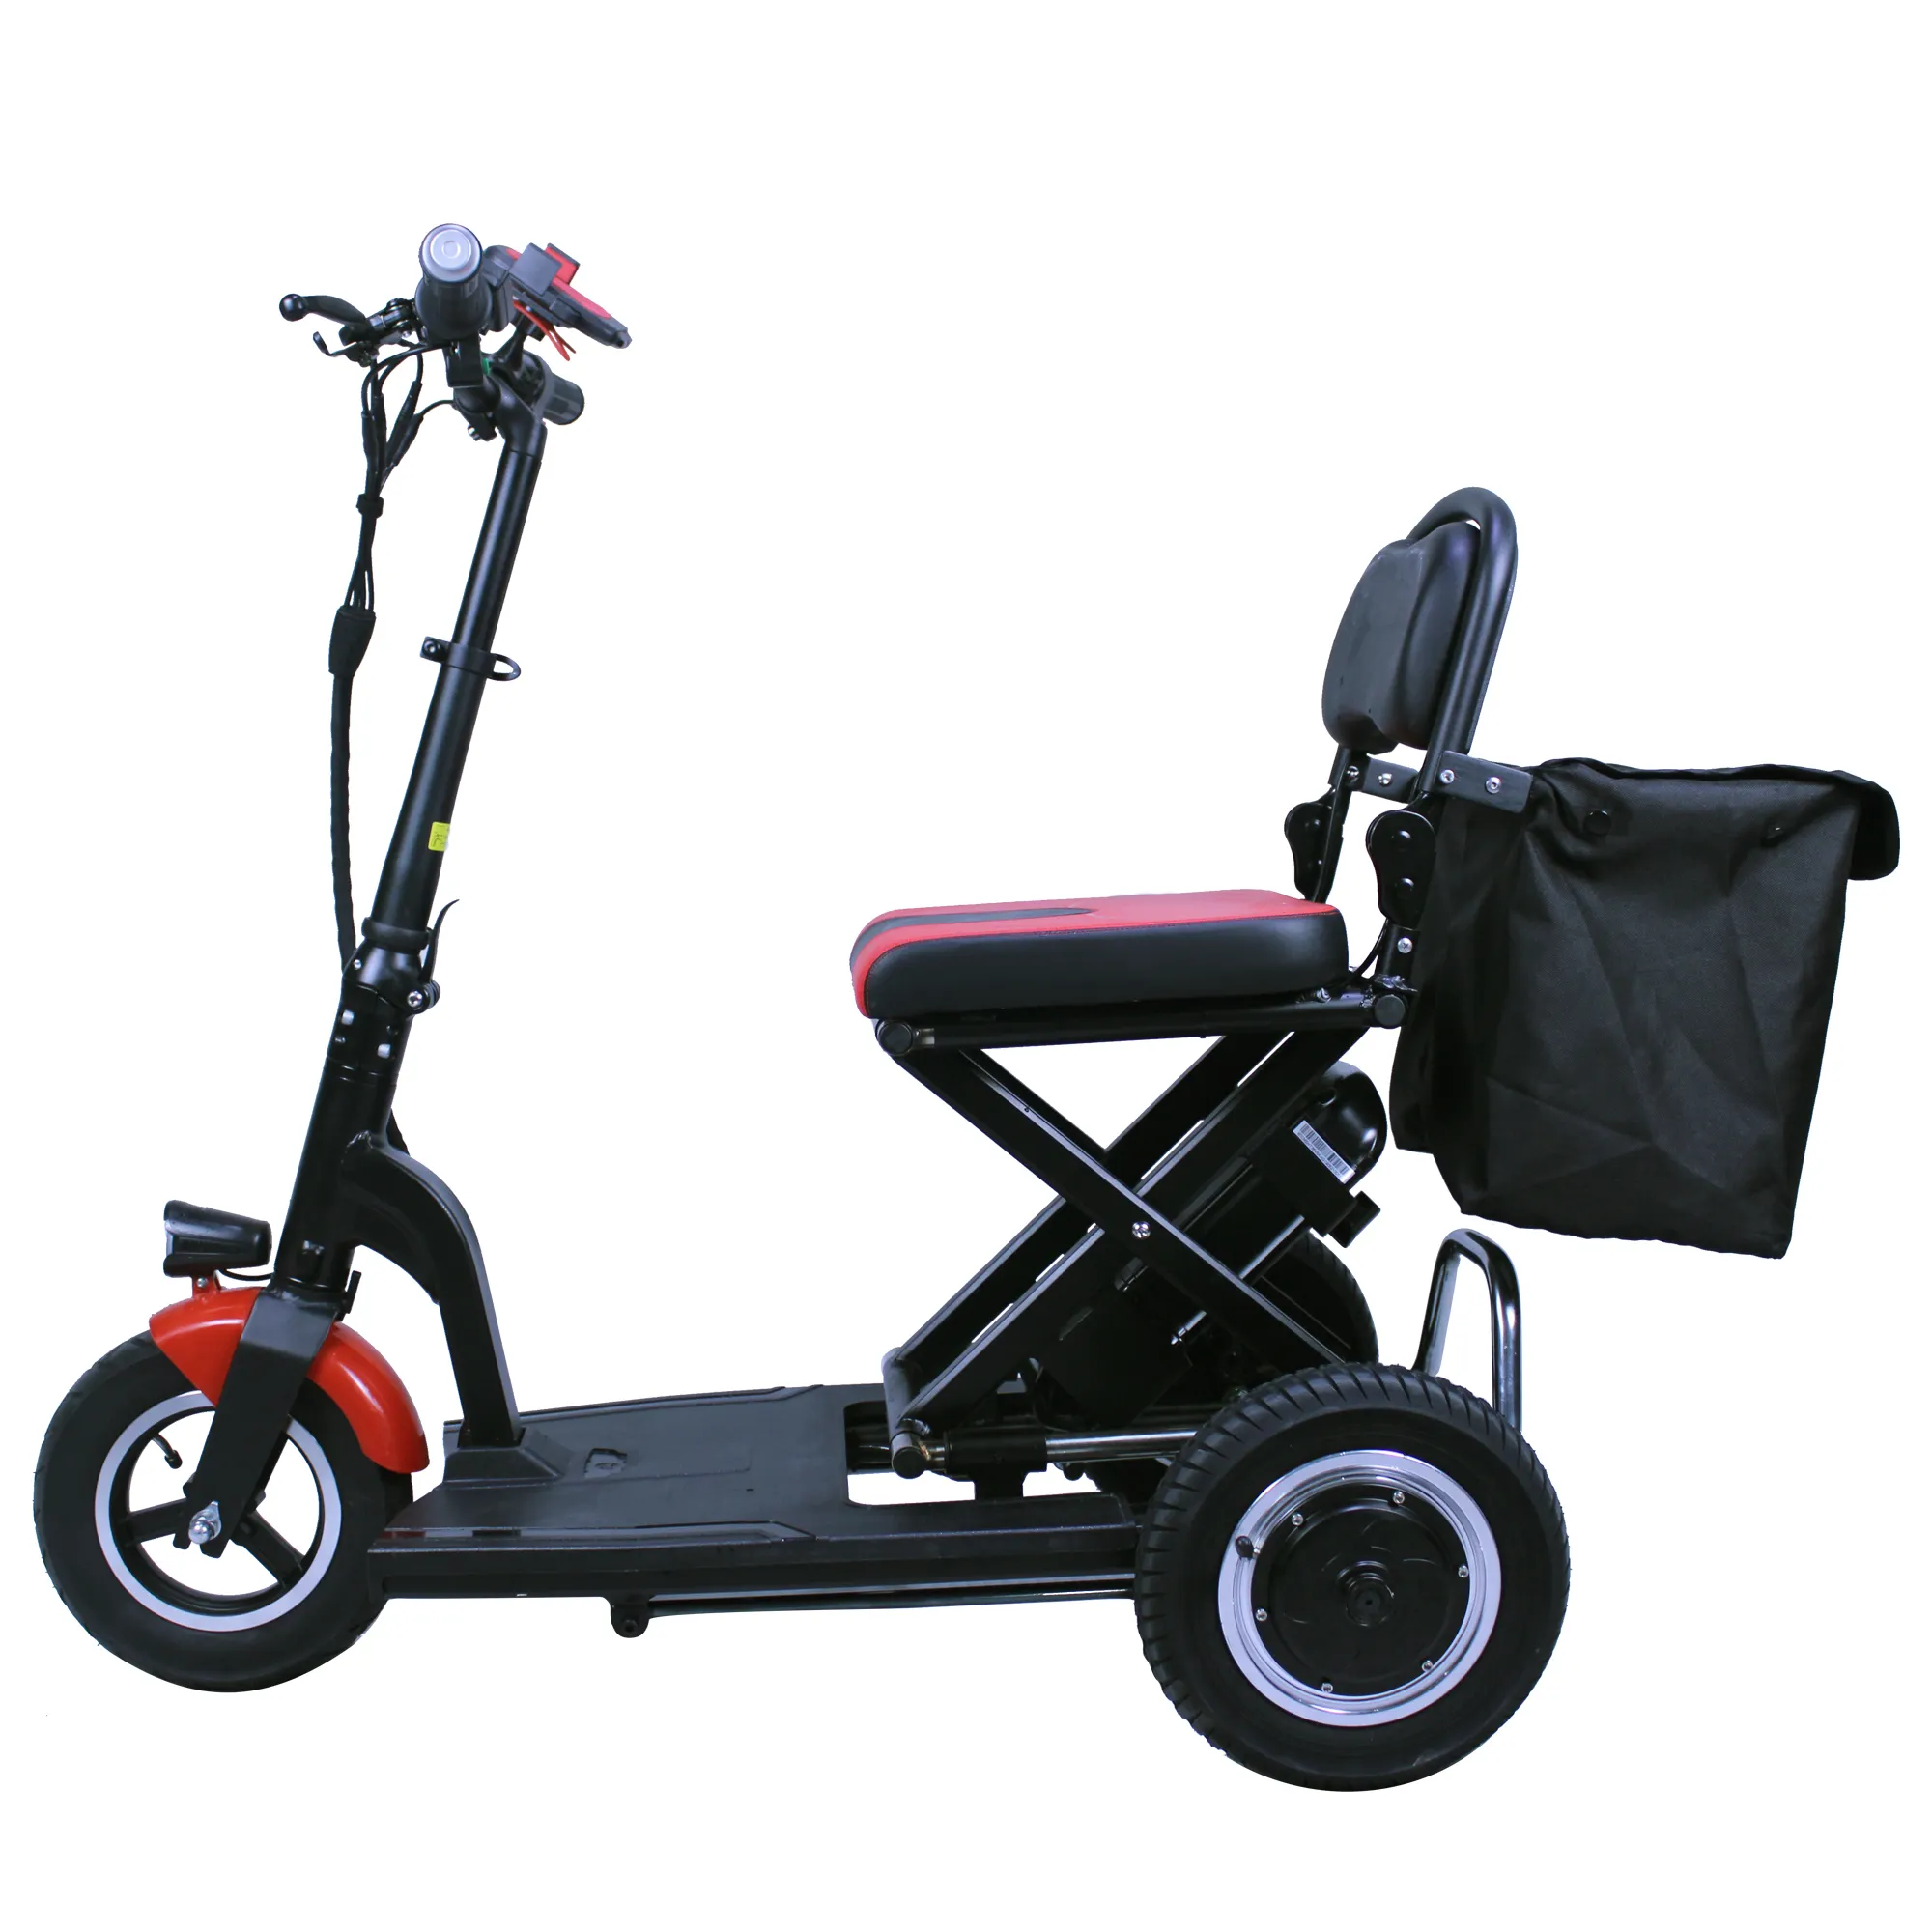 Electric Power Tricycle Folding Mobility Scooter Adult 3 Three Wheel Price Cheap Electric Tricycles For Elderly Disabled